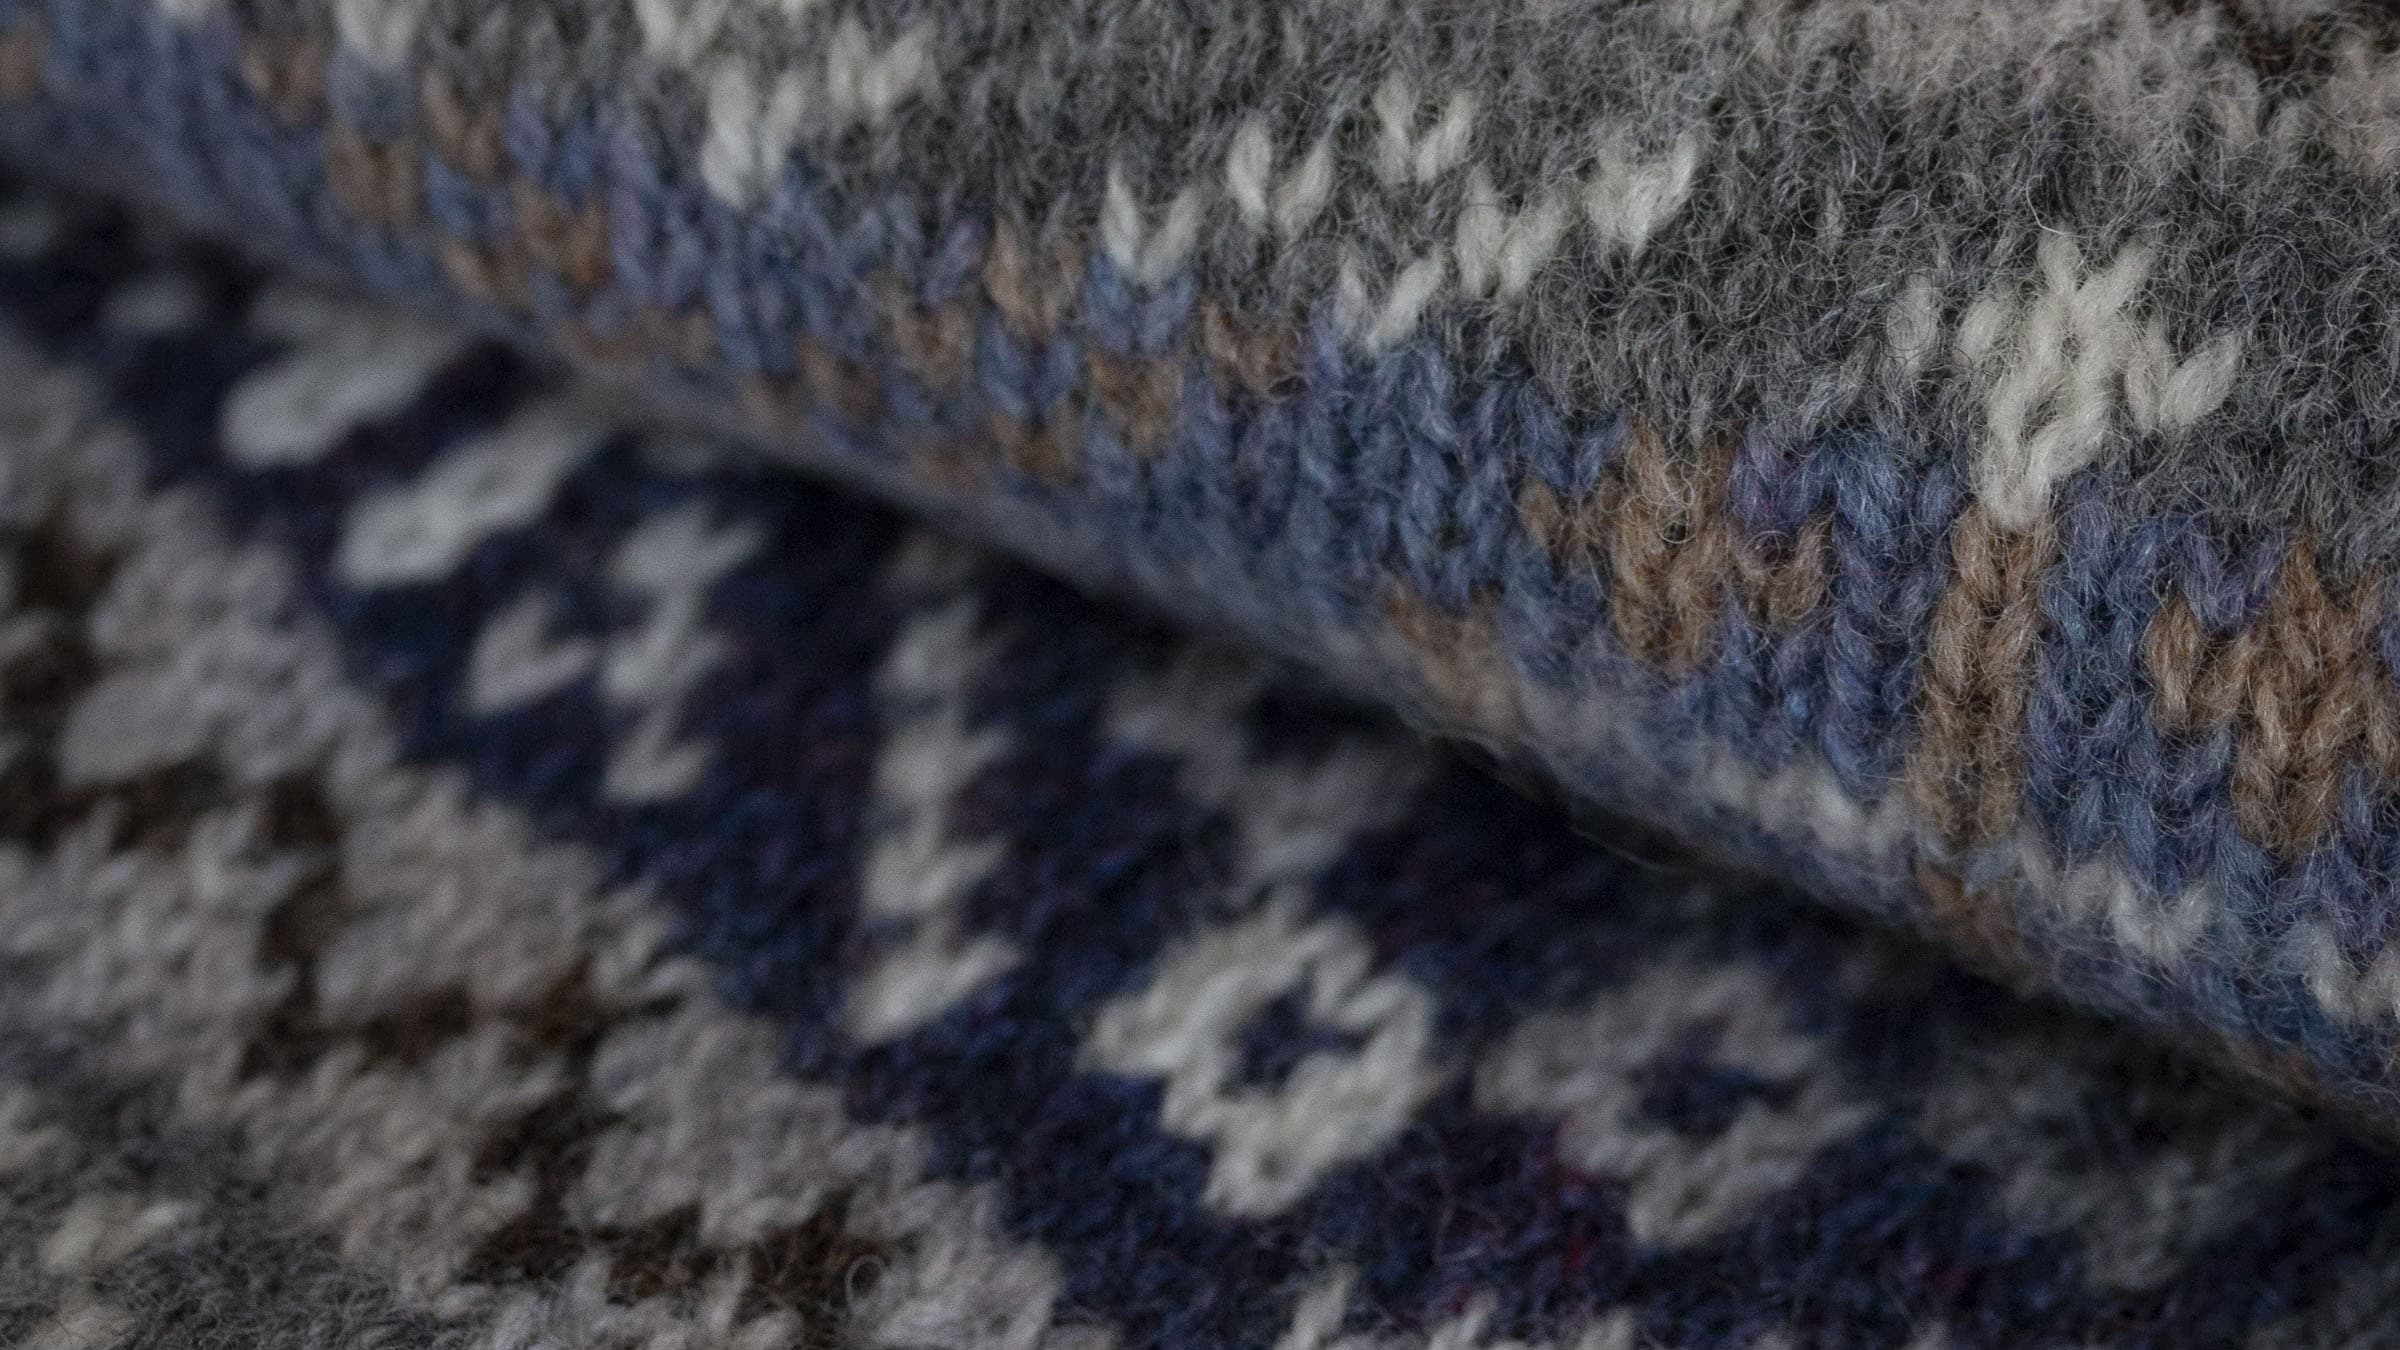 Johnstons of Elgin Hand Knitted Wool Fairisle Sweater detail image. Proceeds go to the Longhope Lifeboat service.